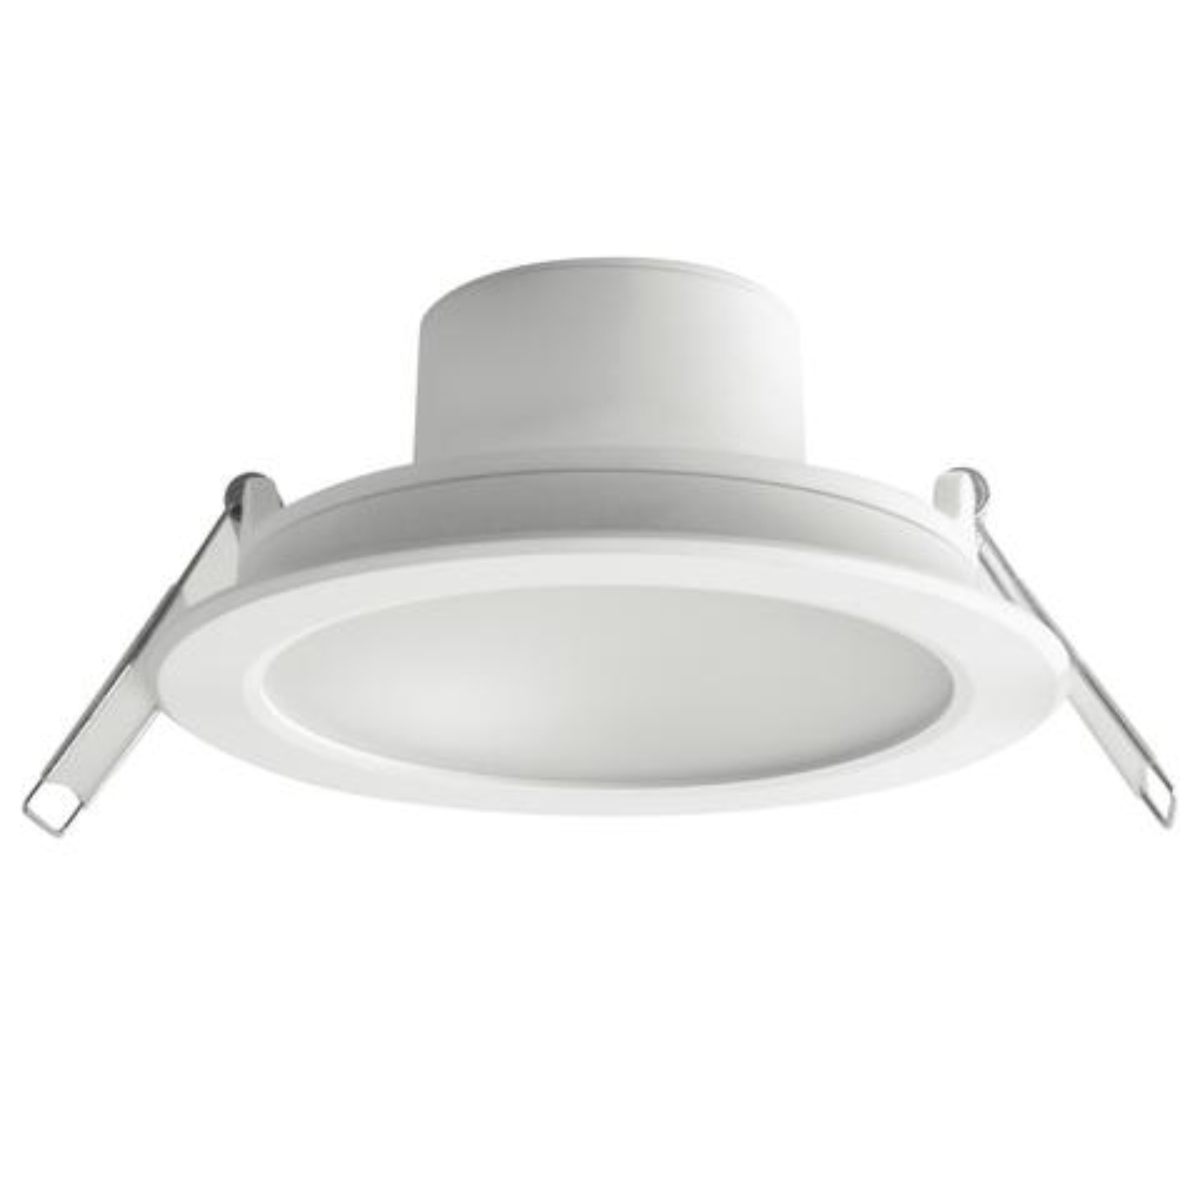 Megaman Sienalite Integrated LED Downlight F55500RC/WH26 12W 6500K - Daylight